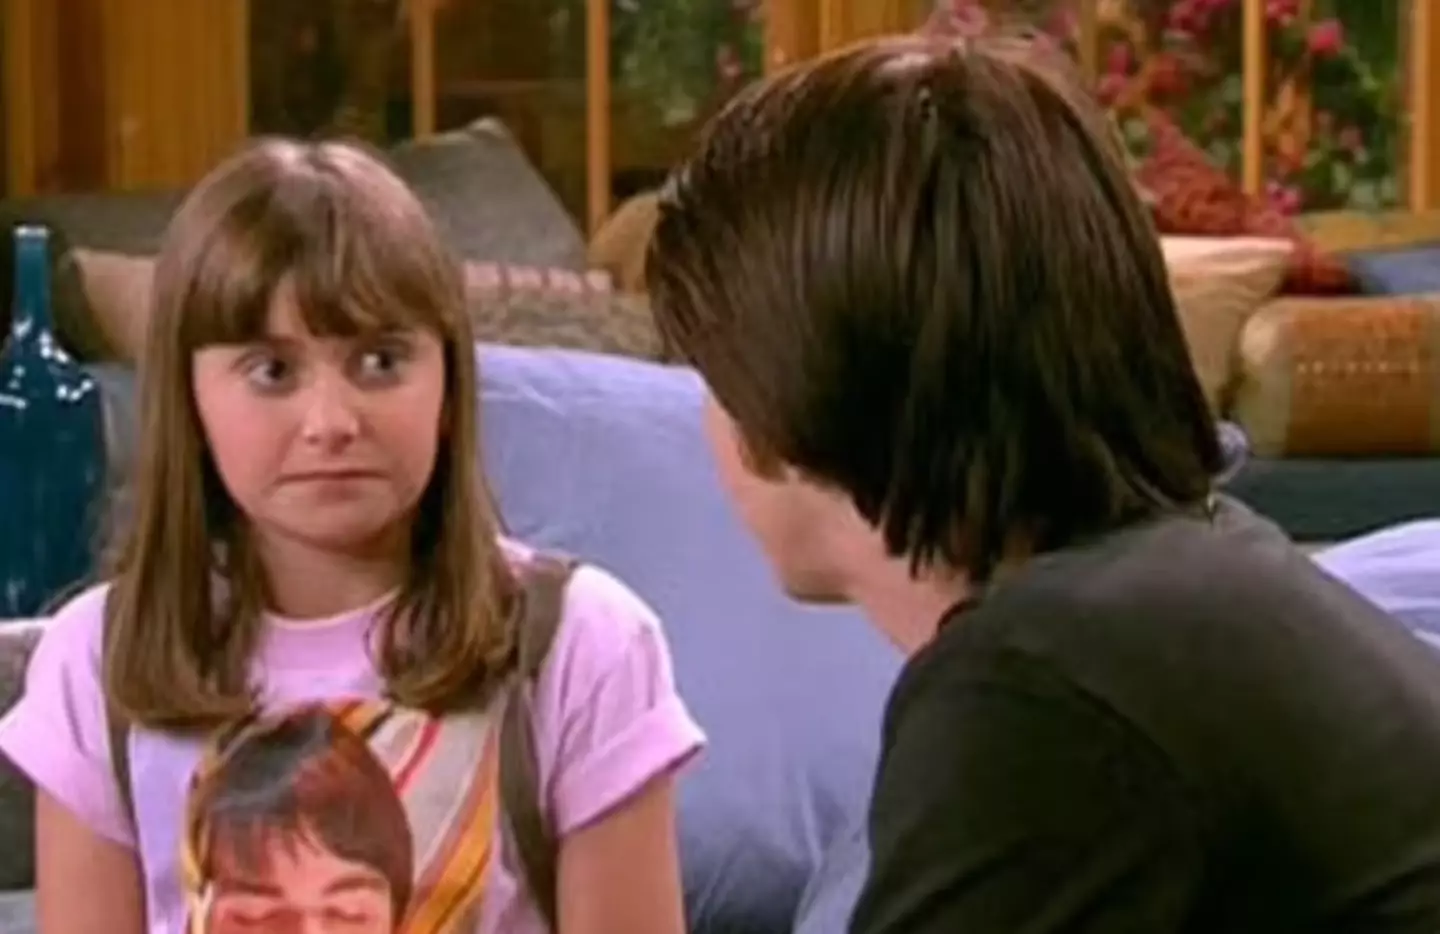 Stoner appeared in numerous TV shows including Drake & Josh.